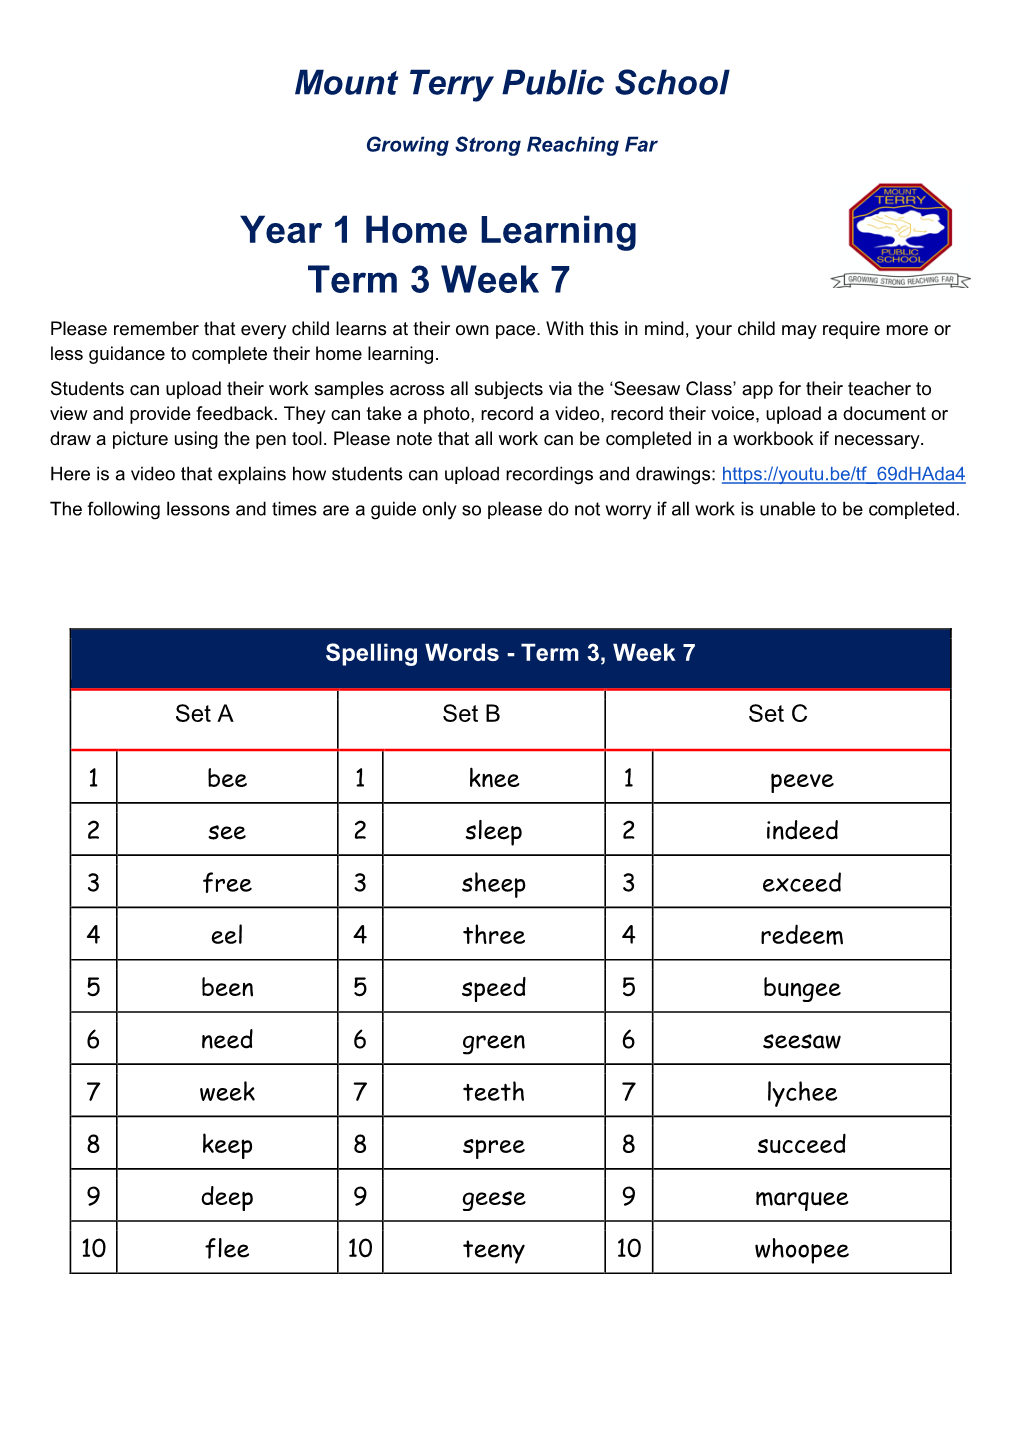 Year 1 Home Learning Term 3 Week 7